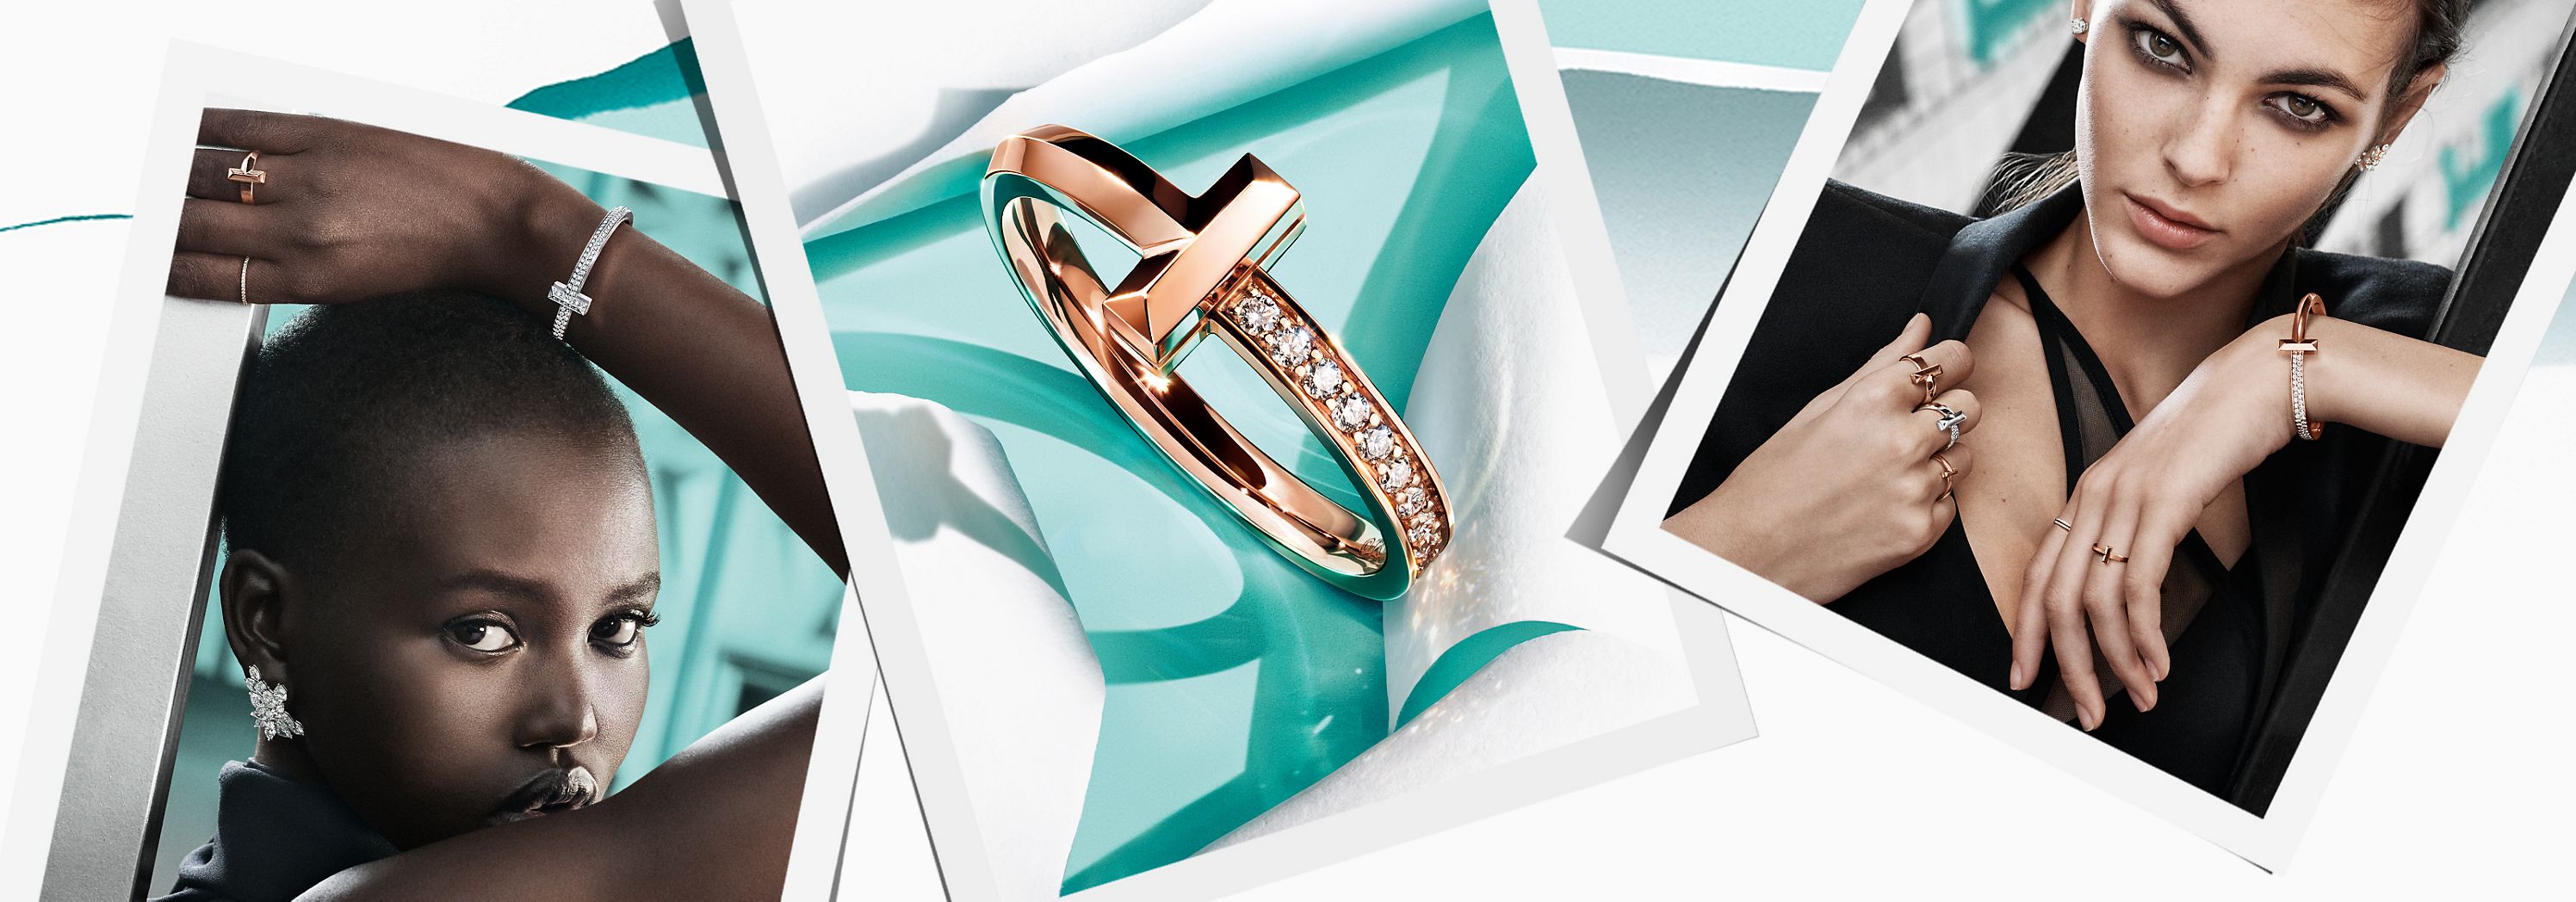 Tiffany & Co. Official | Luxury Jewelry, Gifts & Accessories Since 1837